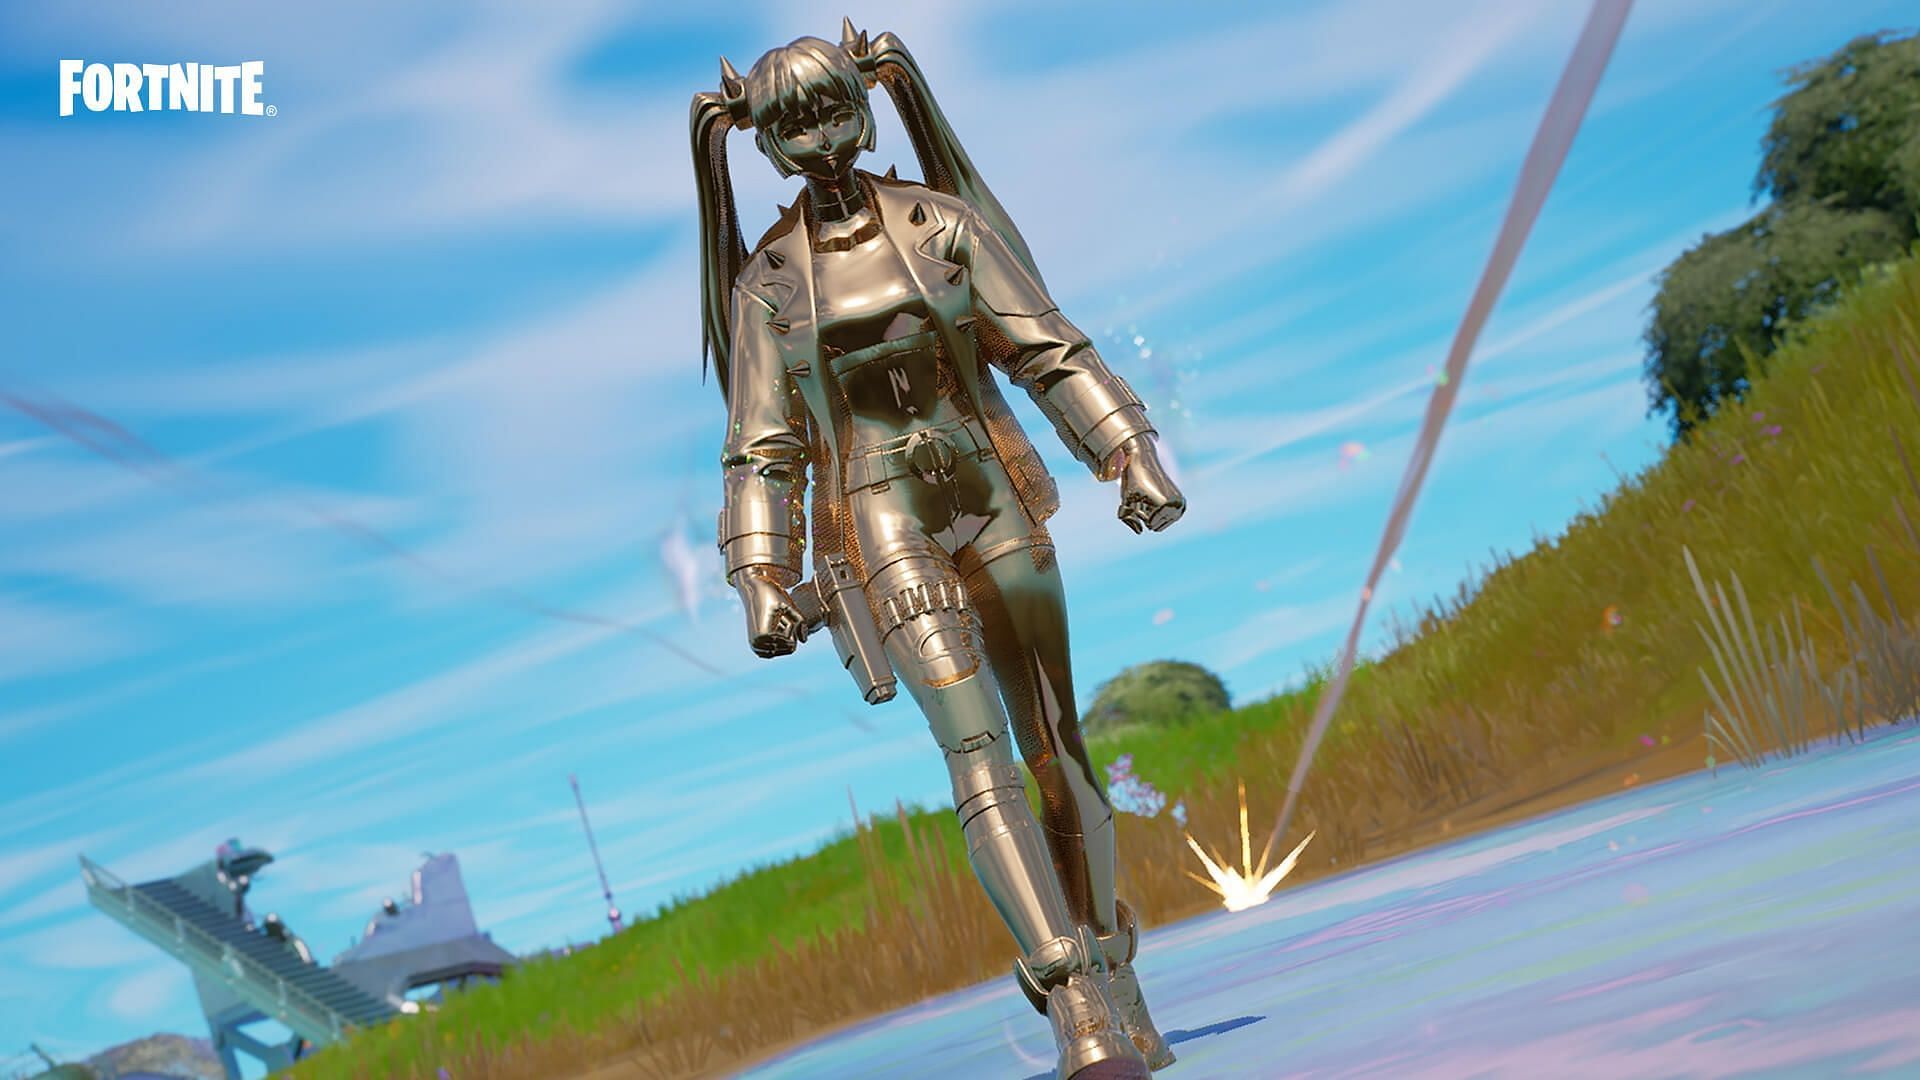 New hints suggest that Fortnite Season 4 might end unusually. (Image via Epic Games)